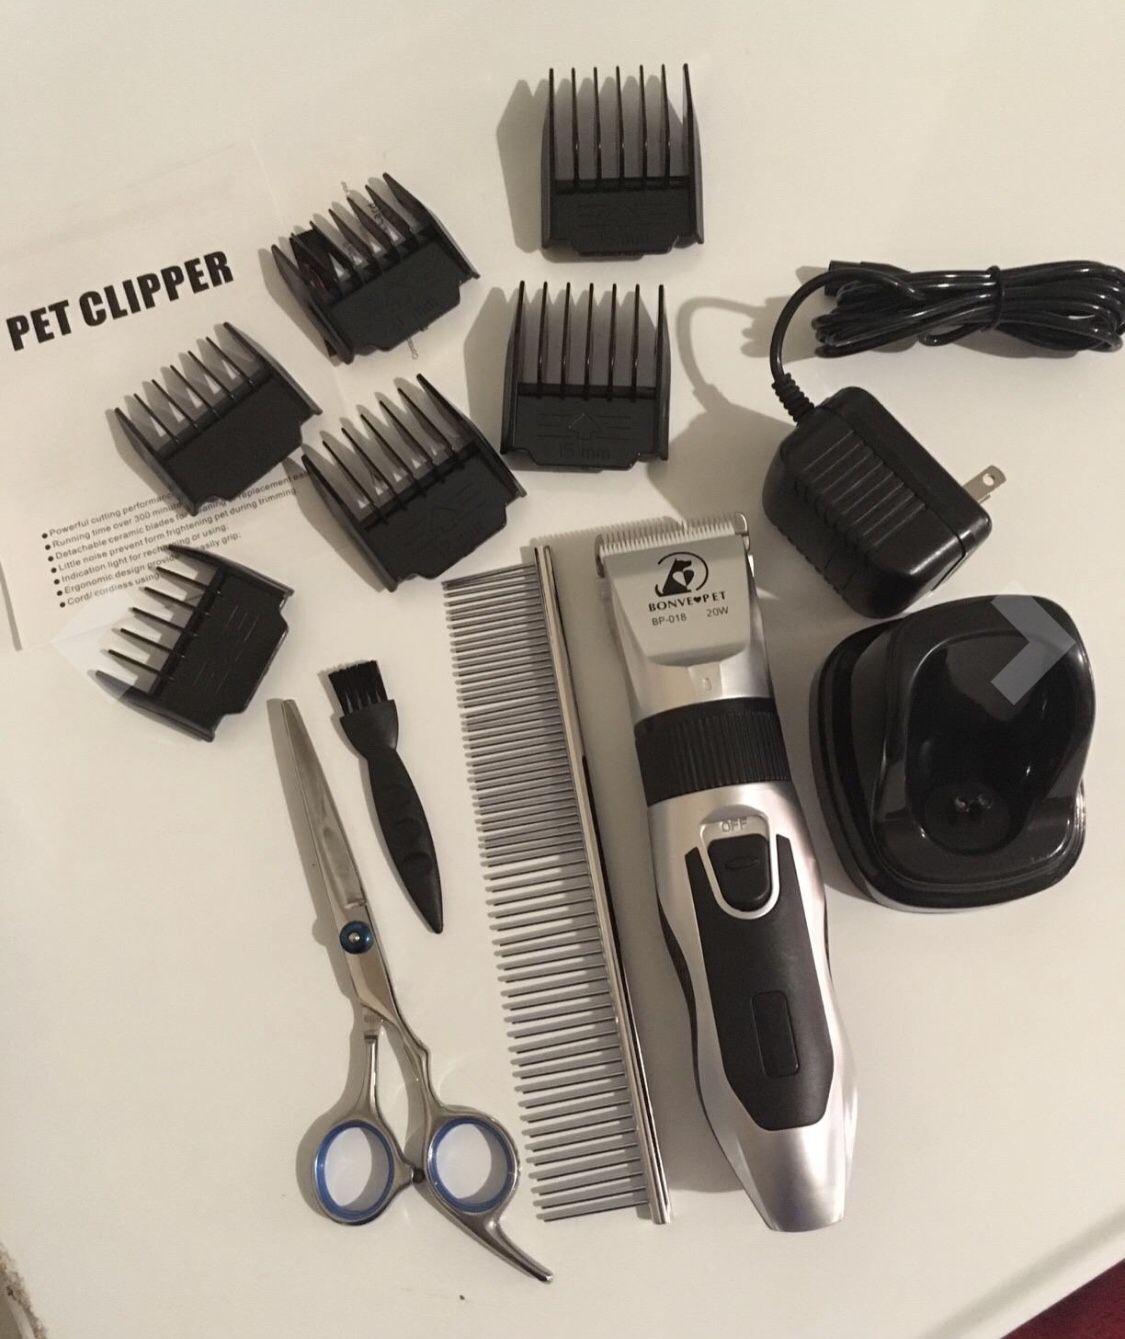 Pet grooming and clipping kit